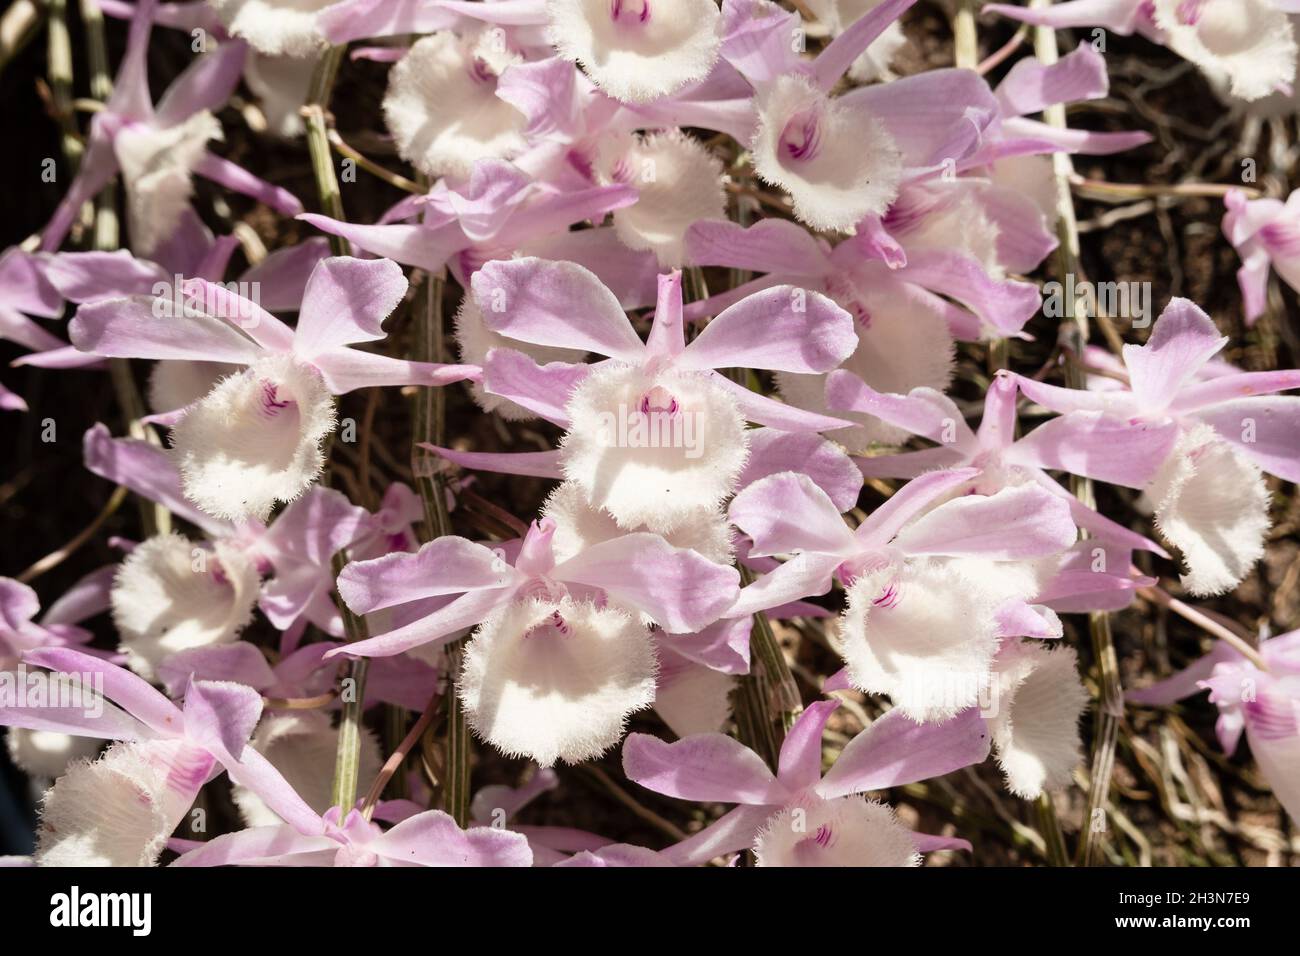 Pink dendrobium flowers blooming Stock Photo